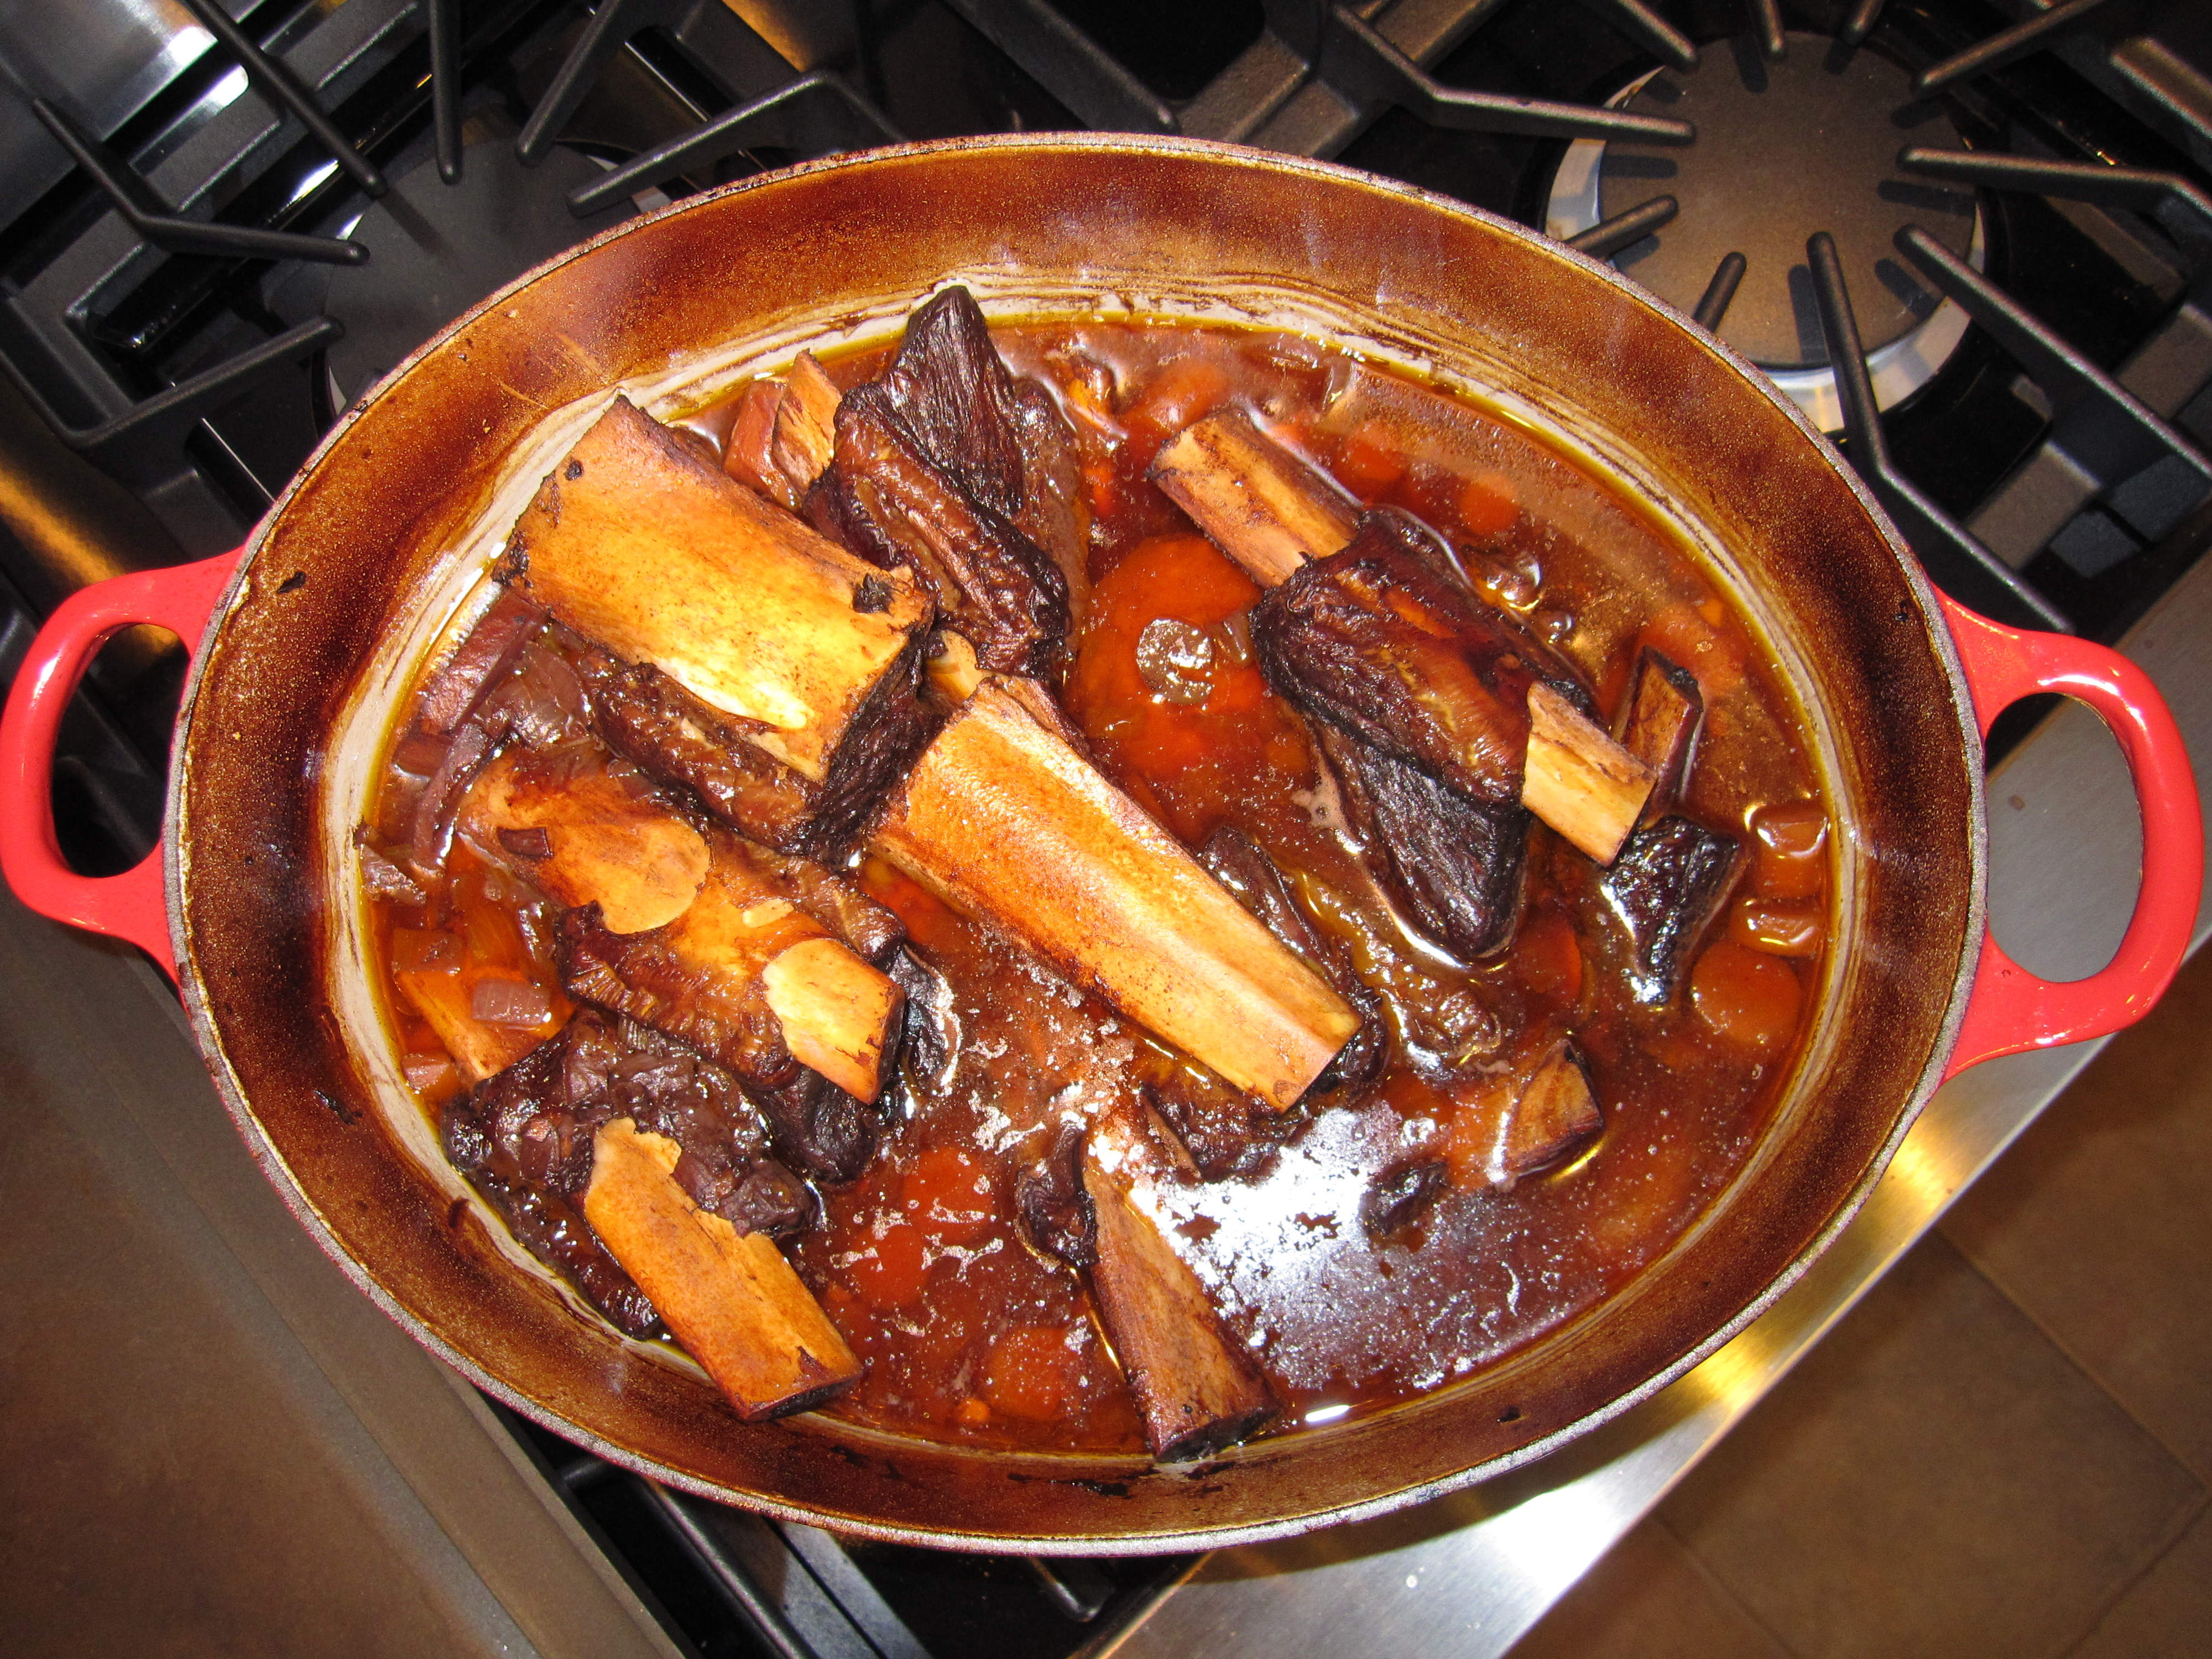 Dutch oven full of vegetables, short ribs and sauce out of oven, sitting on stove top.